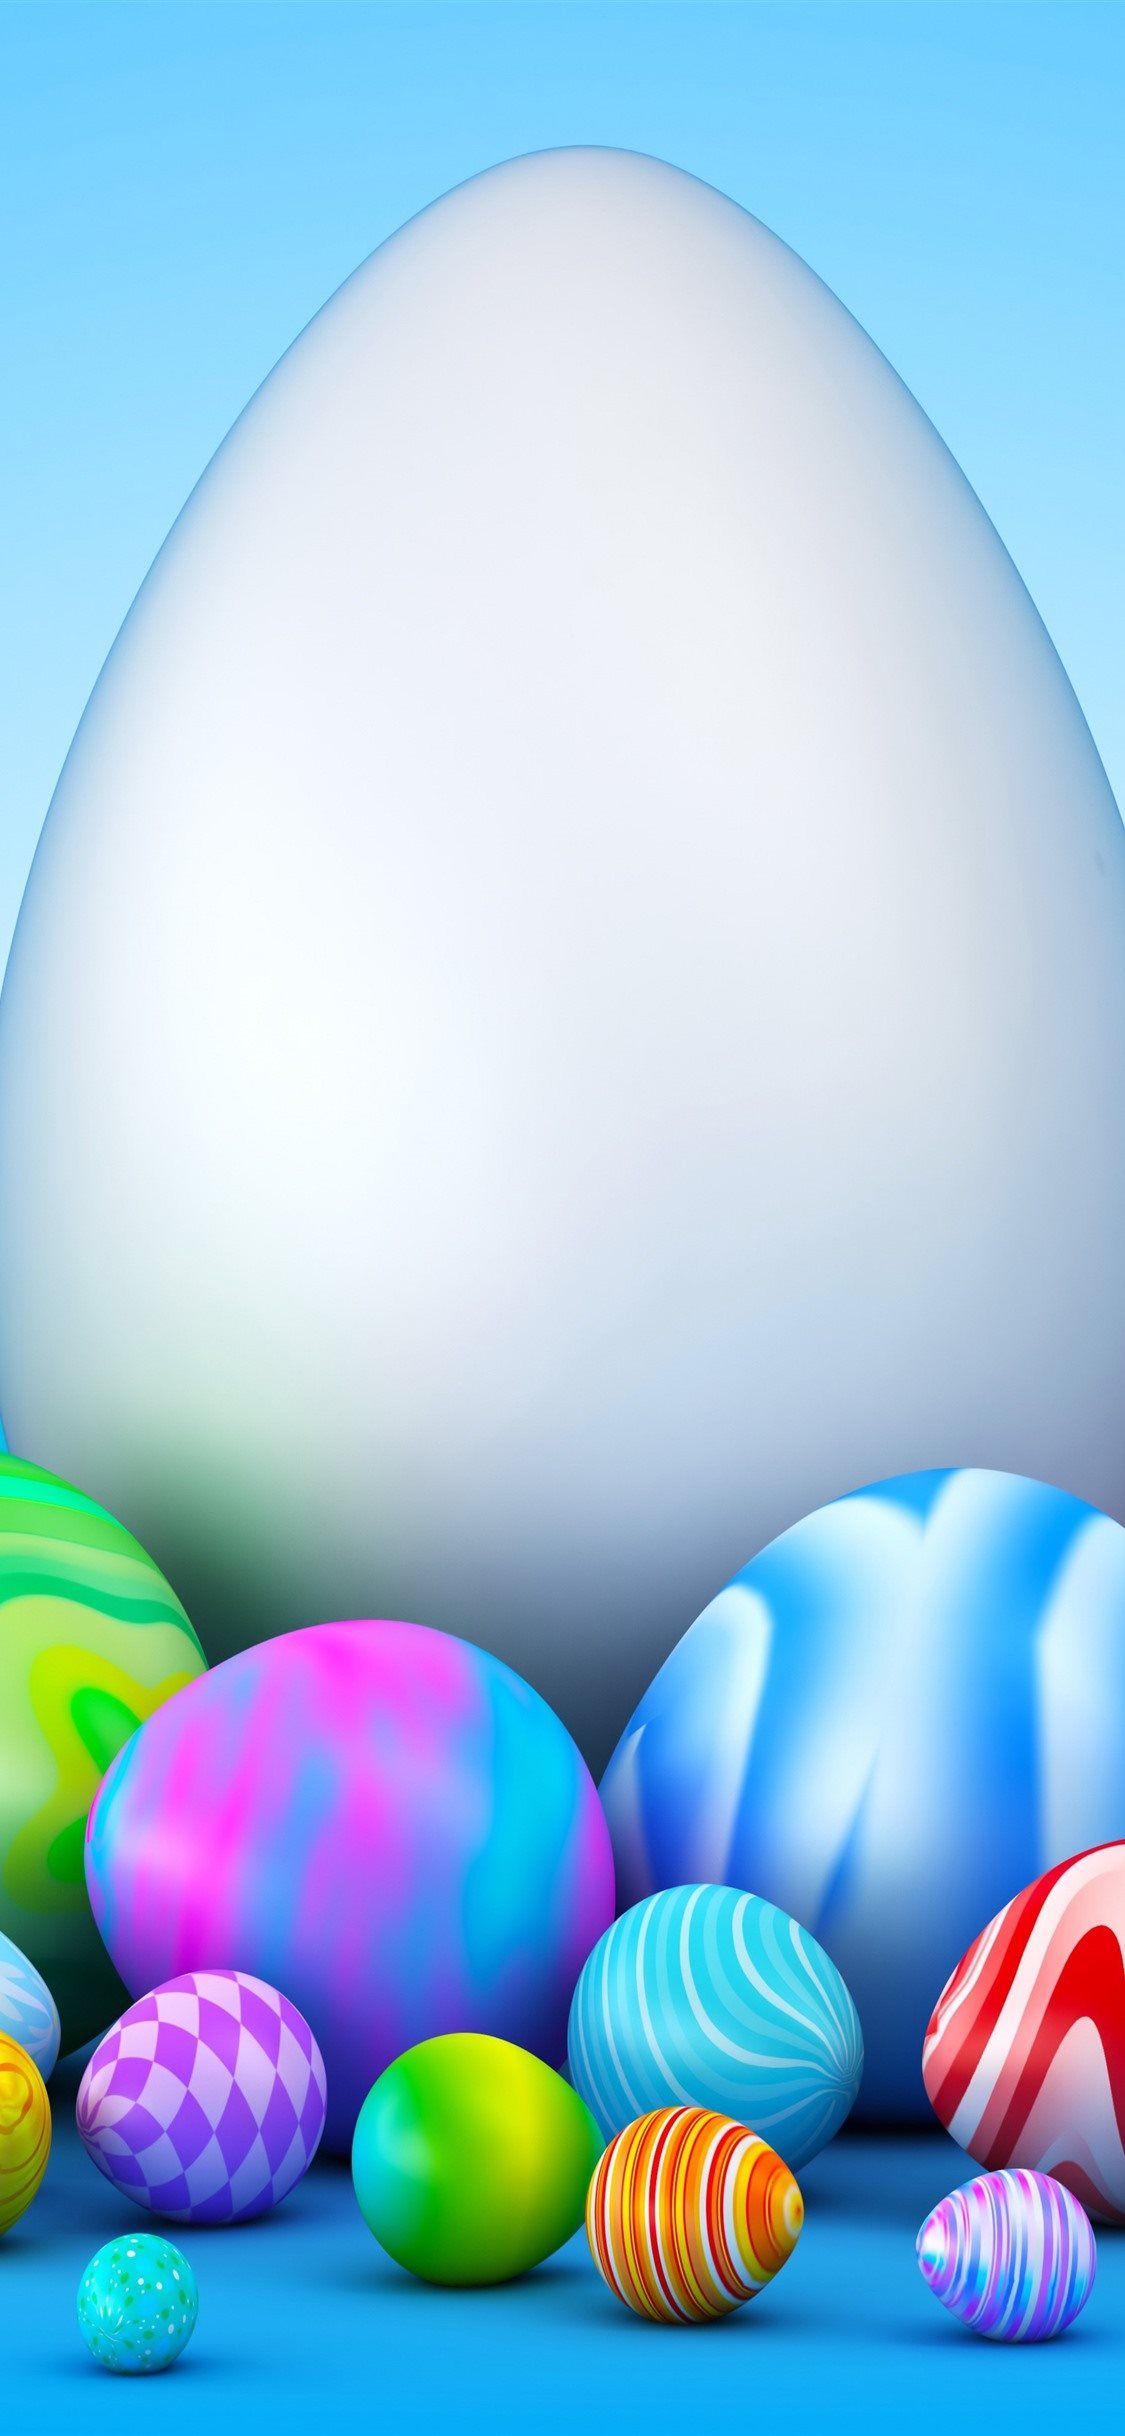 Tones7 Free Ringtones on Twitter Free Easter Wallpaper For Your Phone  httpstcoi9nXqIilTw bunny eggs holiday wallpaper wallpapers  android iphone httpstcofS9wwXXobY  X